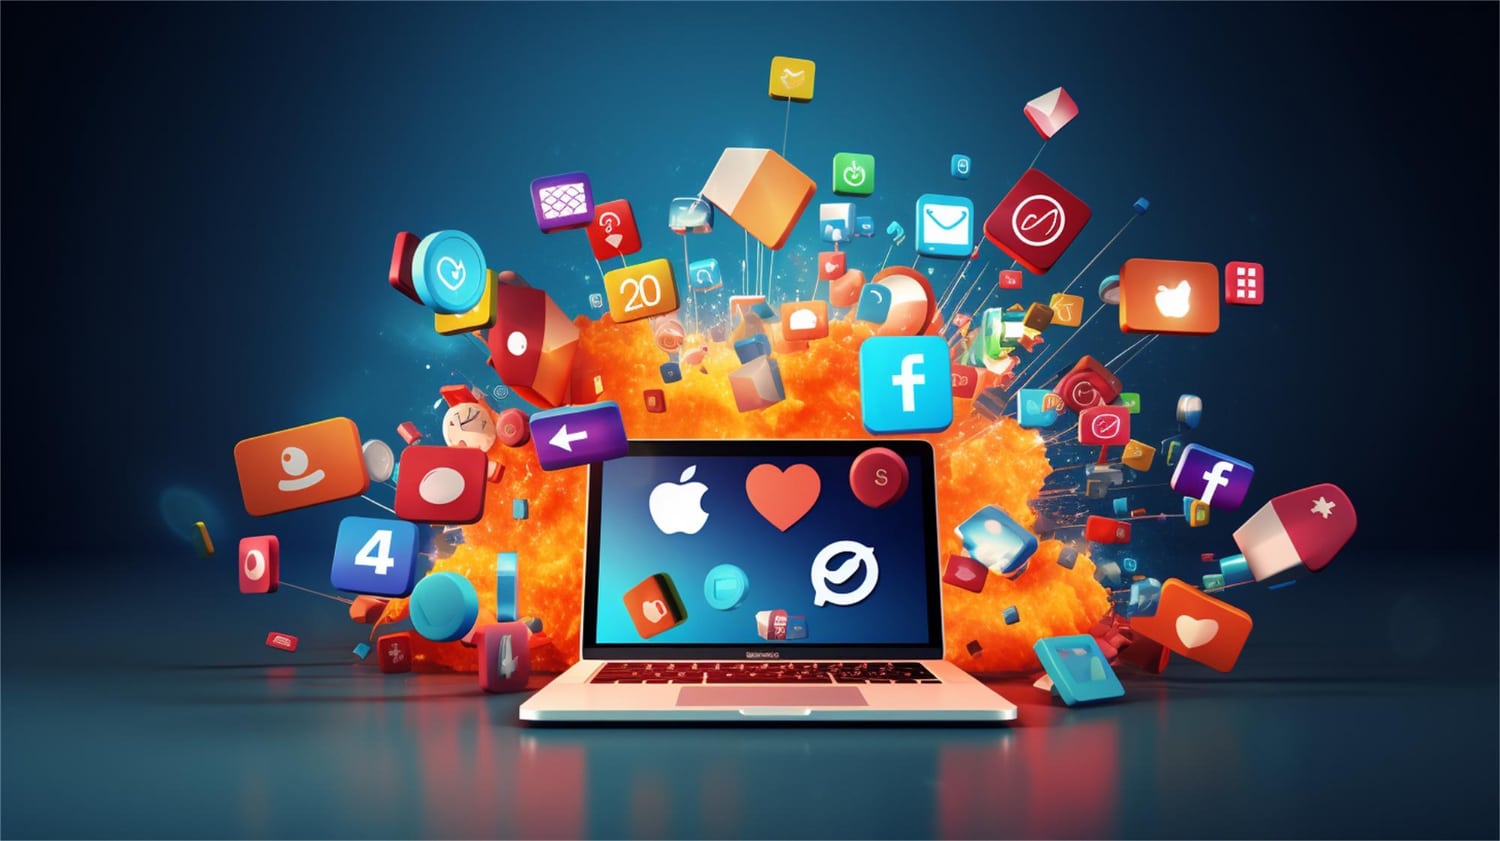 Social Media Marketing Services for Businesses​